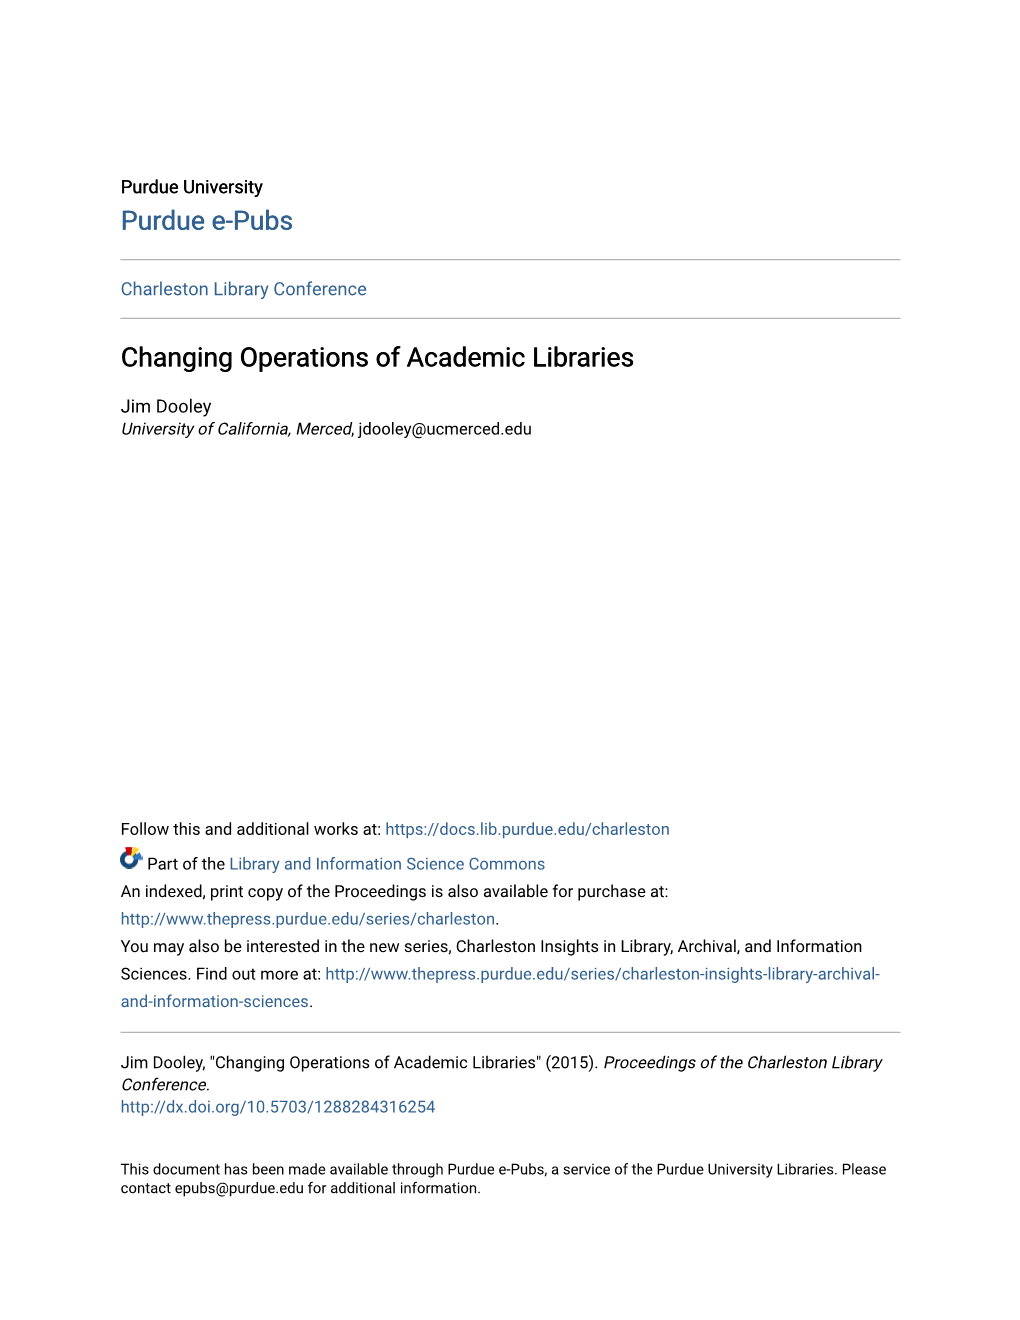 Changing Operations of Academic Libraries